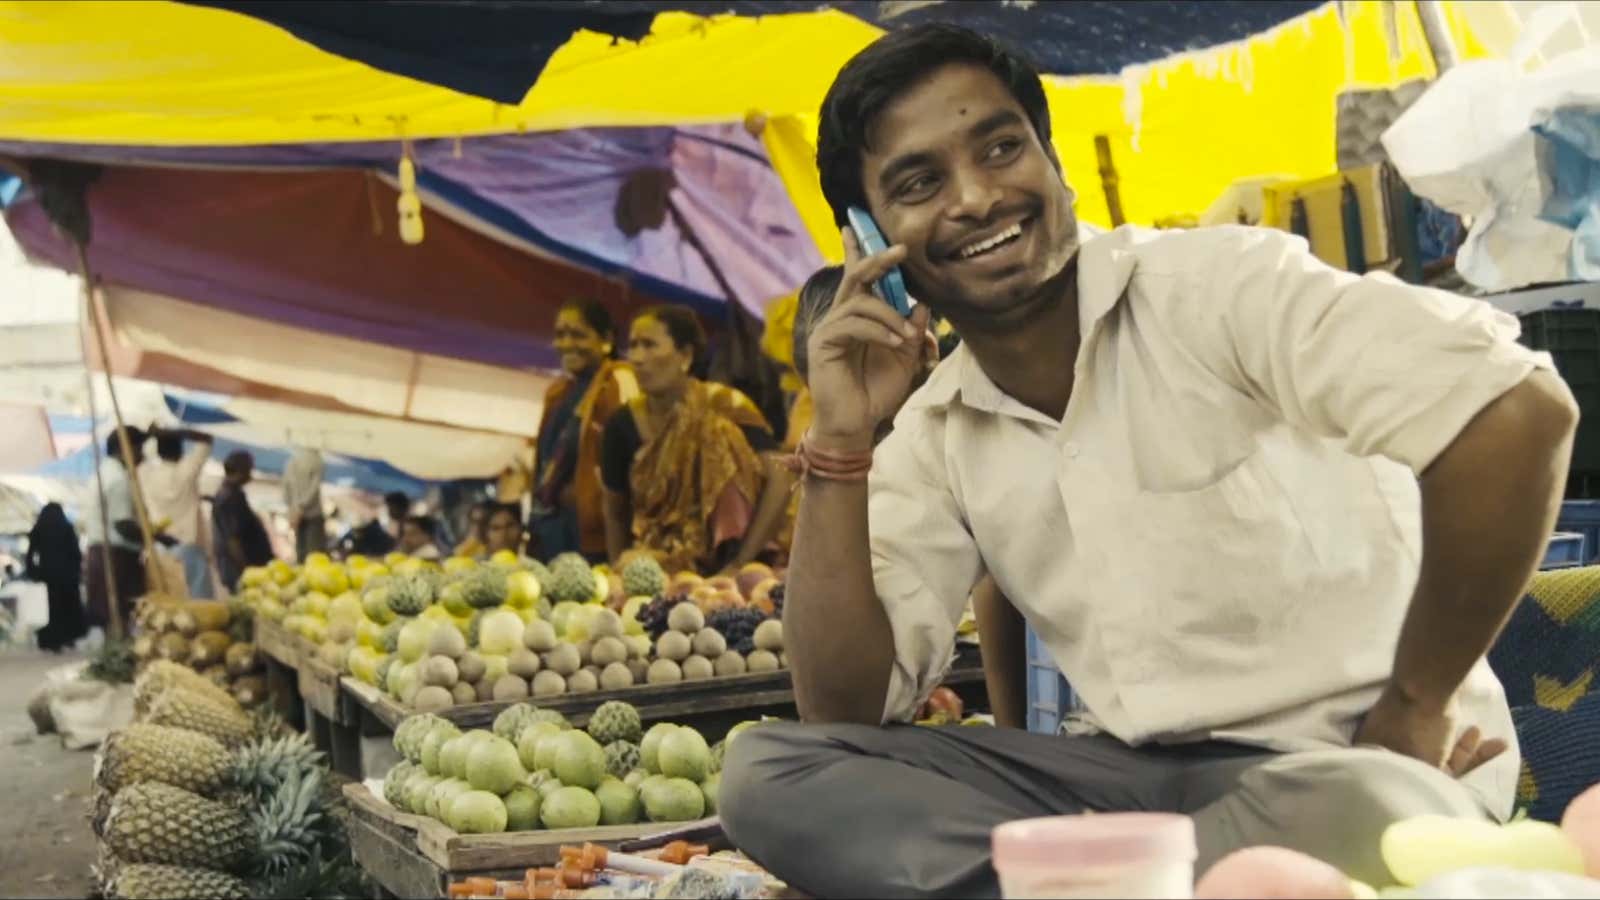 In Bengaluru, mobile is fast becoming the means of choice for accessing financial services.